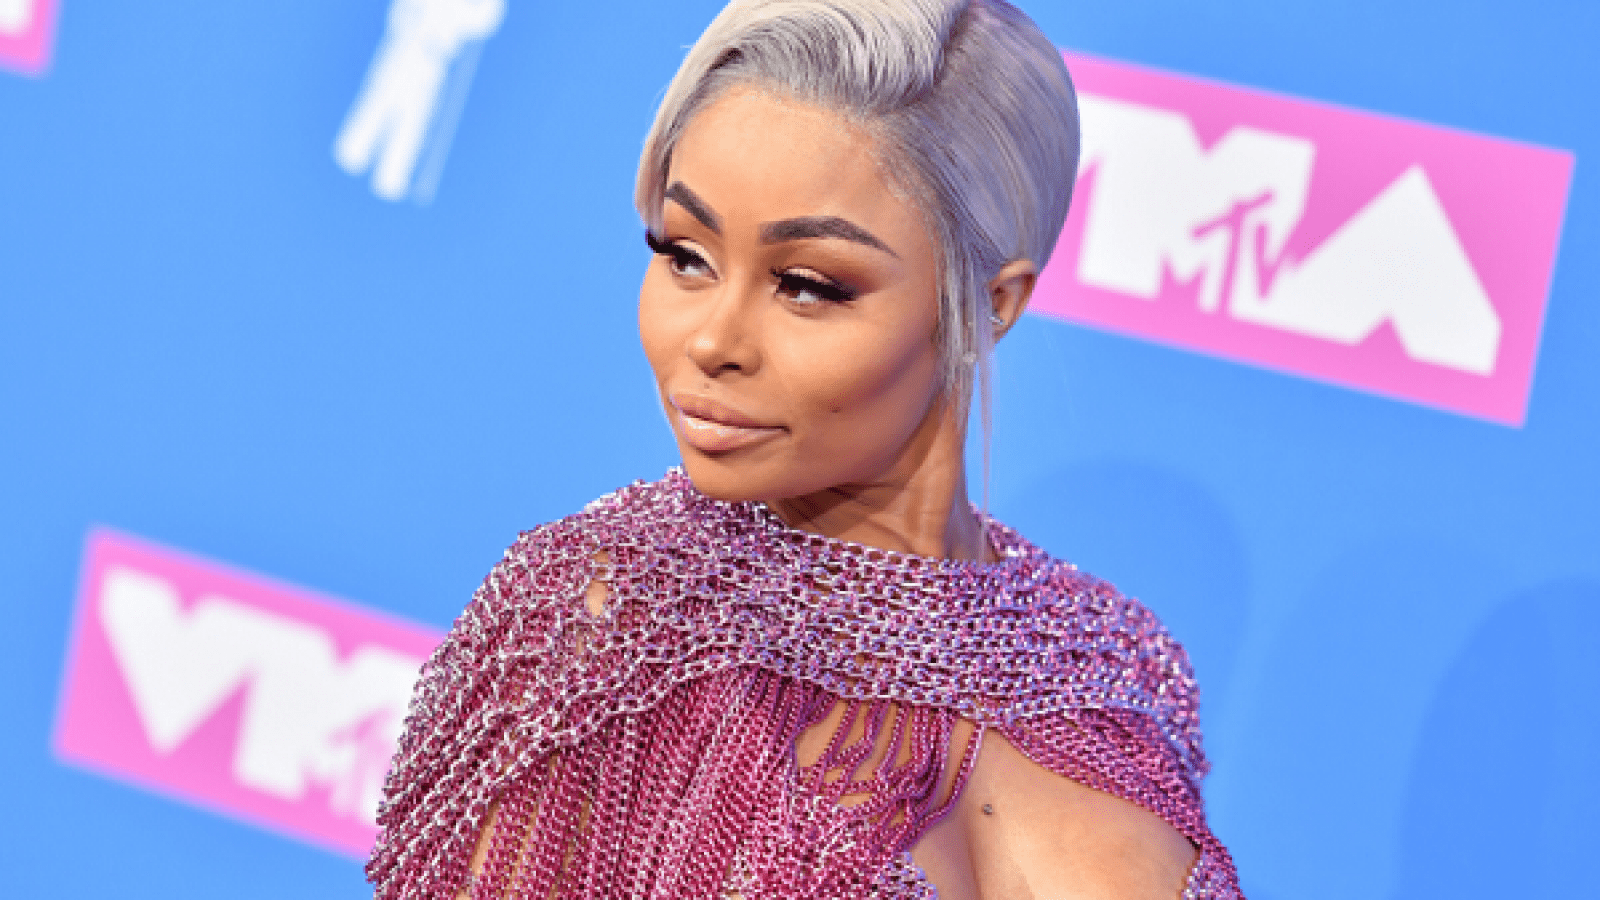 ”blac-chyna-drops-new-music-video-for-her-single-called-hollywood”